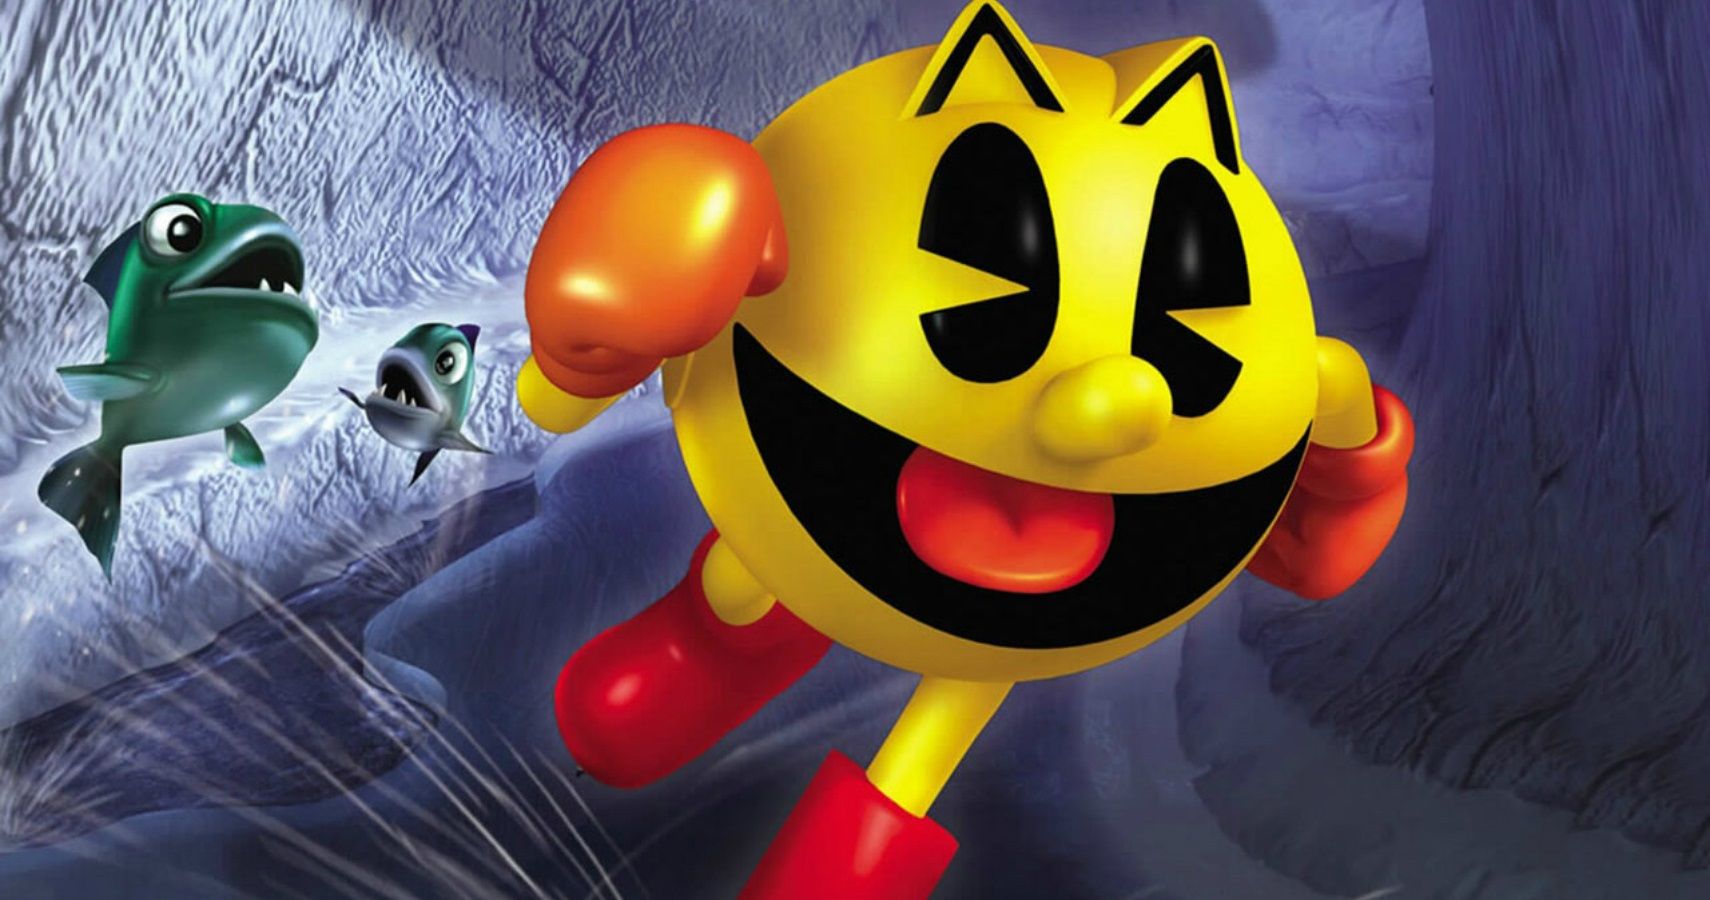 pac man world for ps4